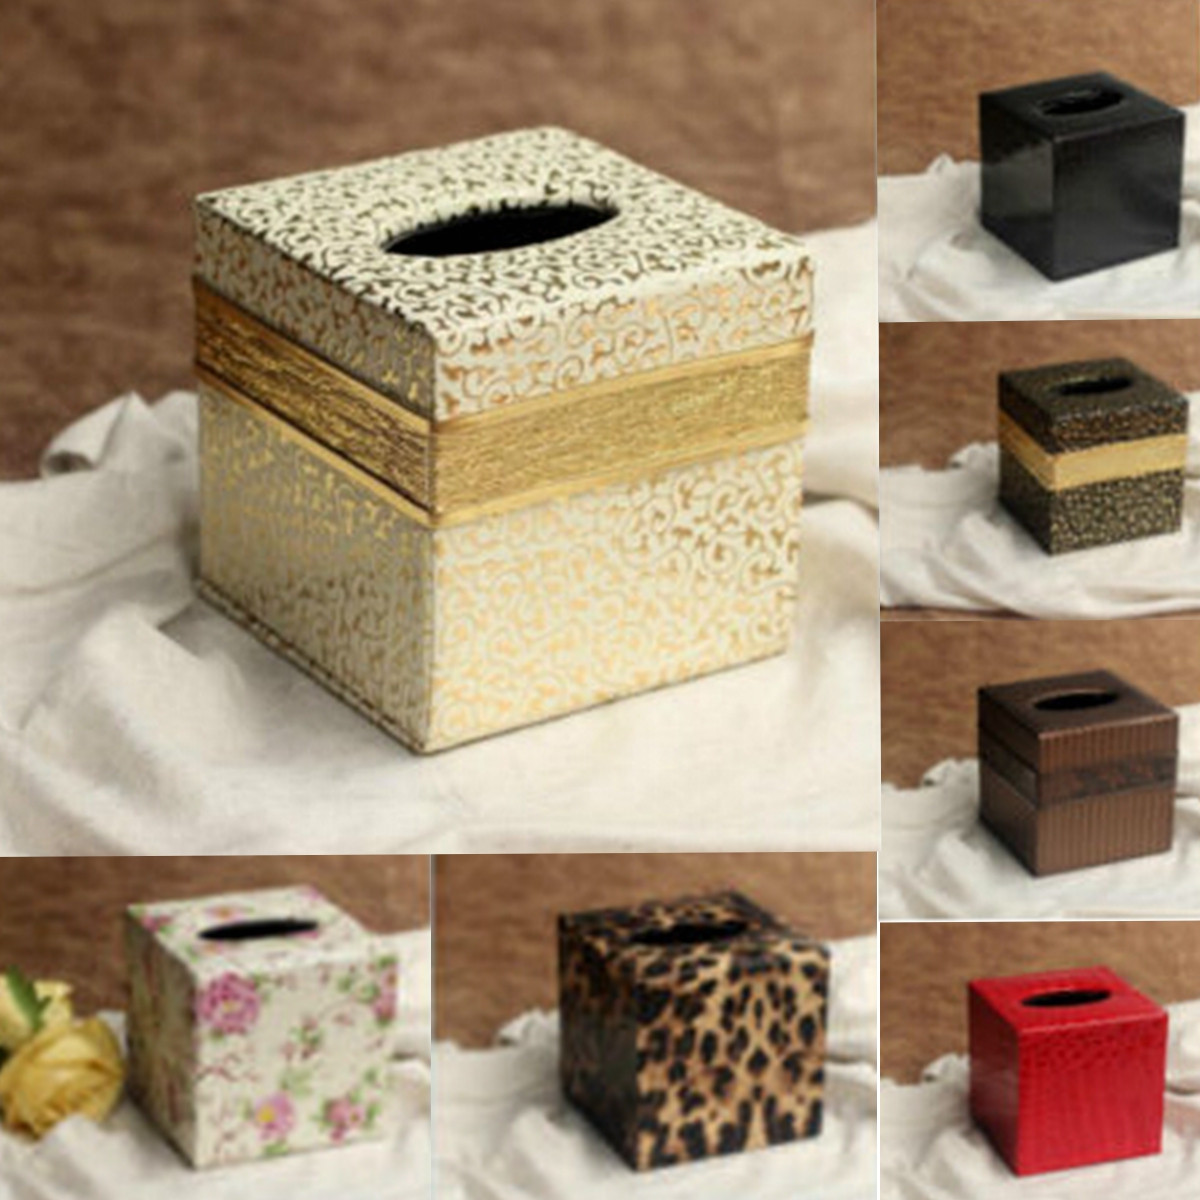 Durable-PU-Leather-Tissue-Box-Case-Cover--Paper-Napkin-Holder-Home-Office-1304877-1